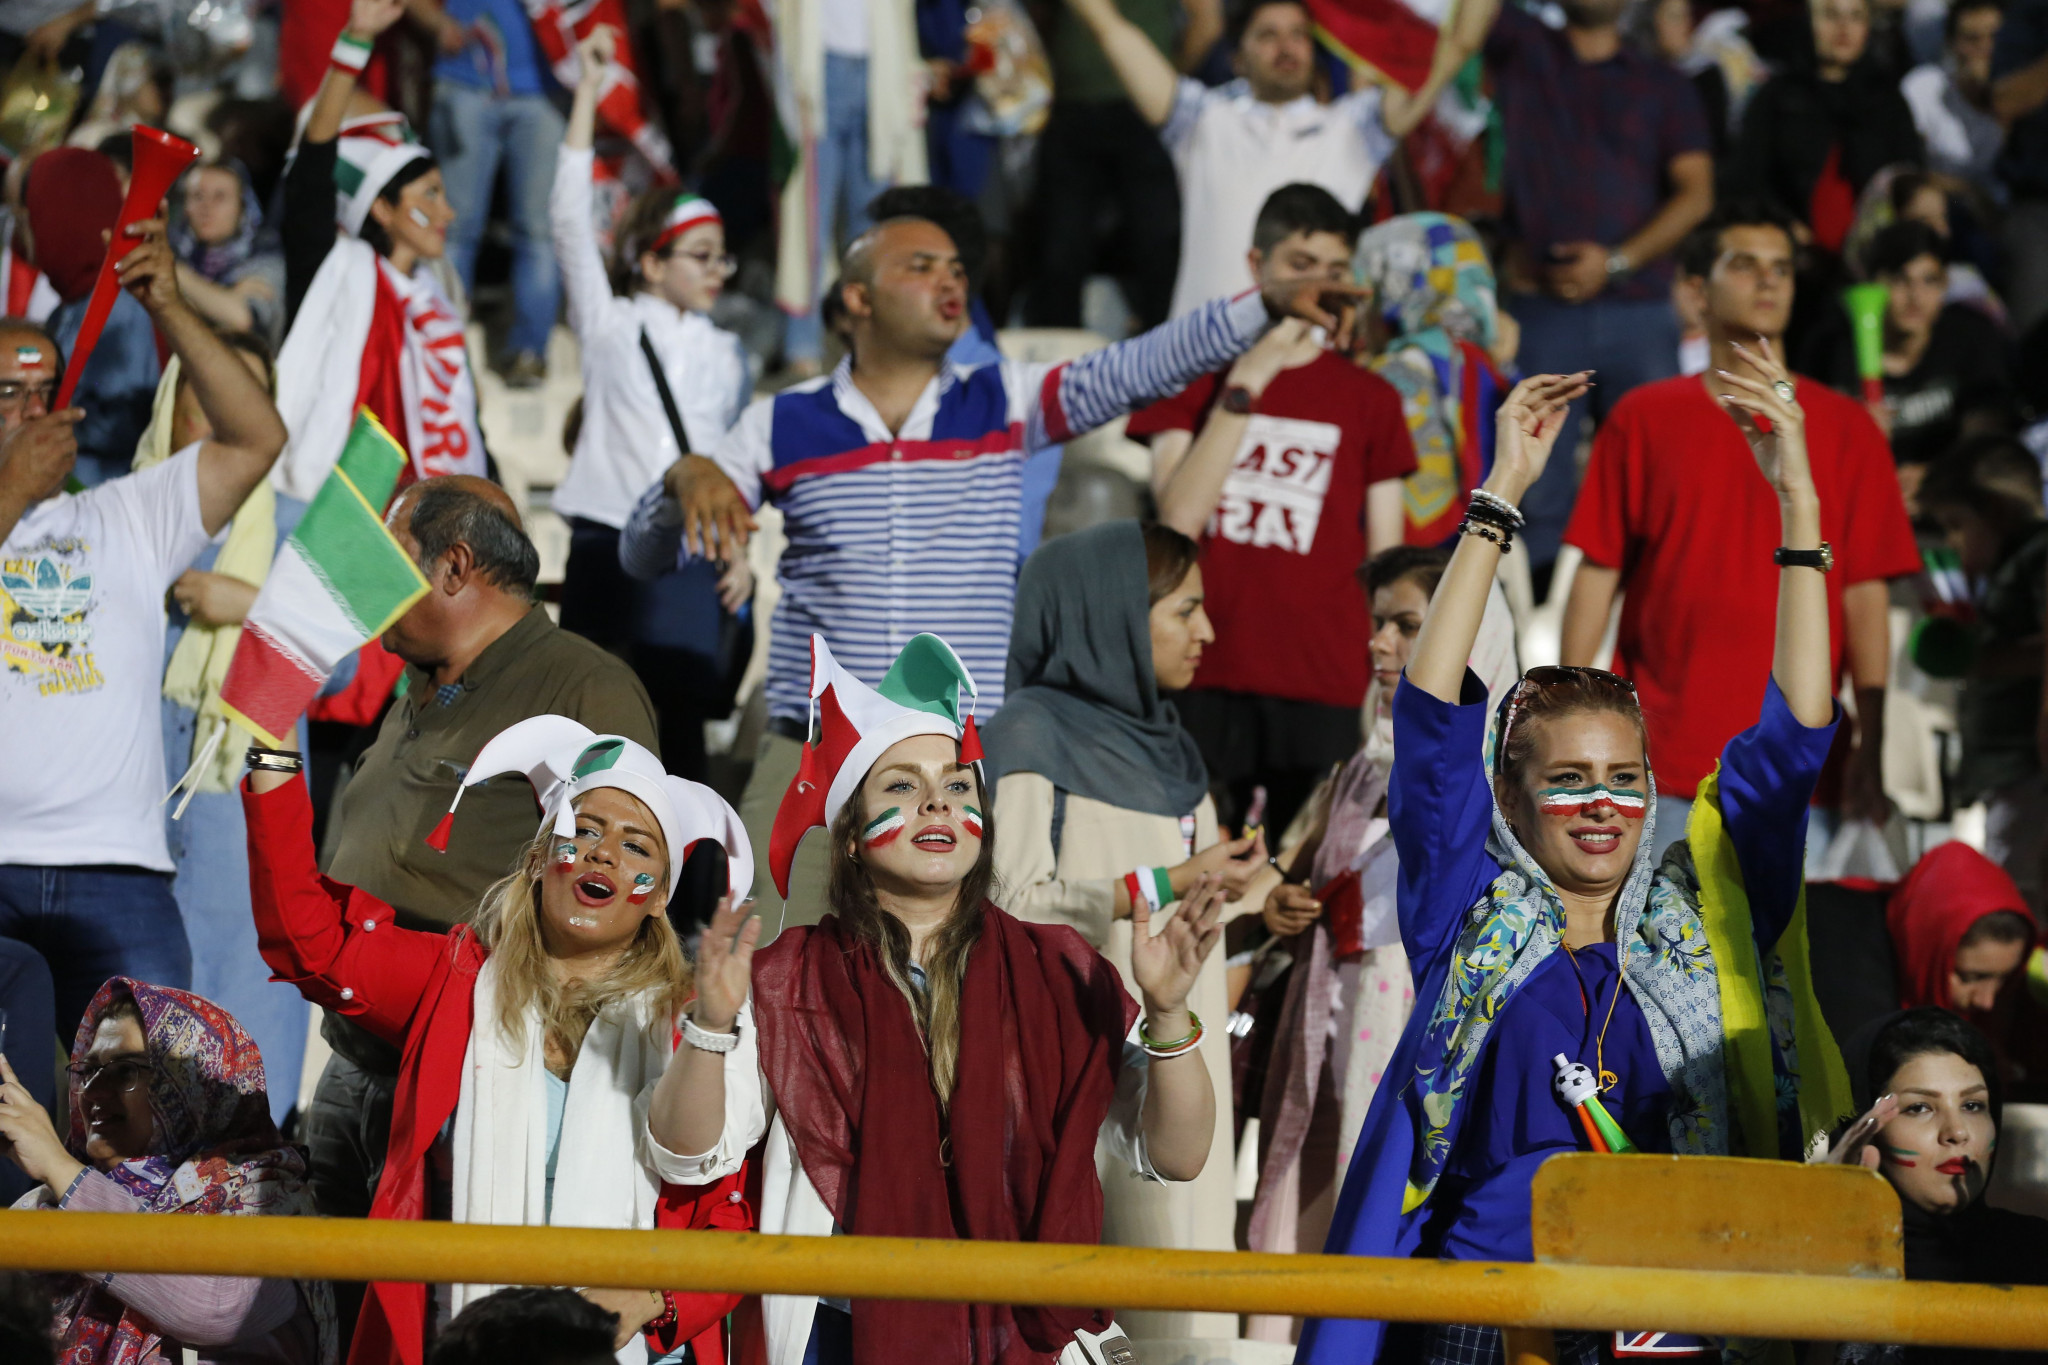 There are growing calls for the ban on women attending men's football in Iran to be lifted, after women were allowed to attend screenings of the FIFA World Cup in Tehran's Azadi Stadium ©Getty Images